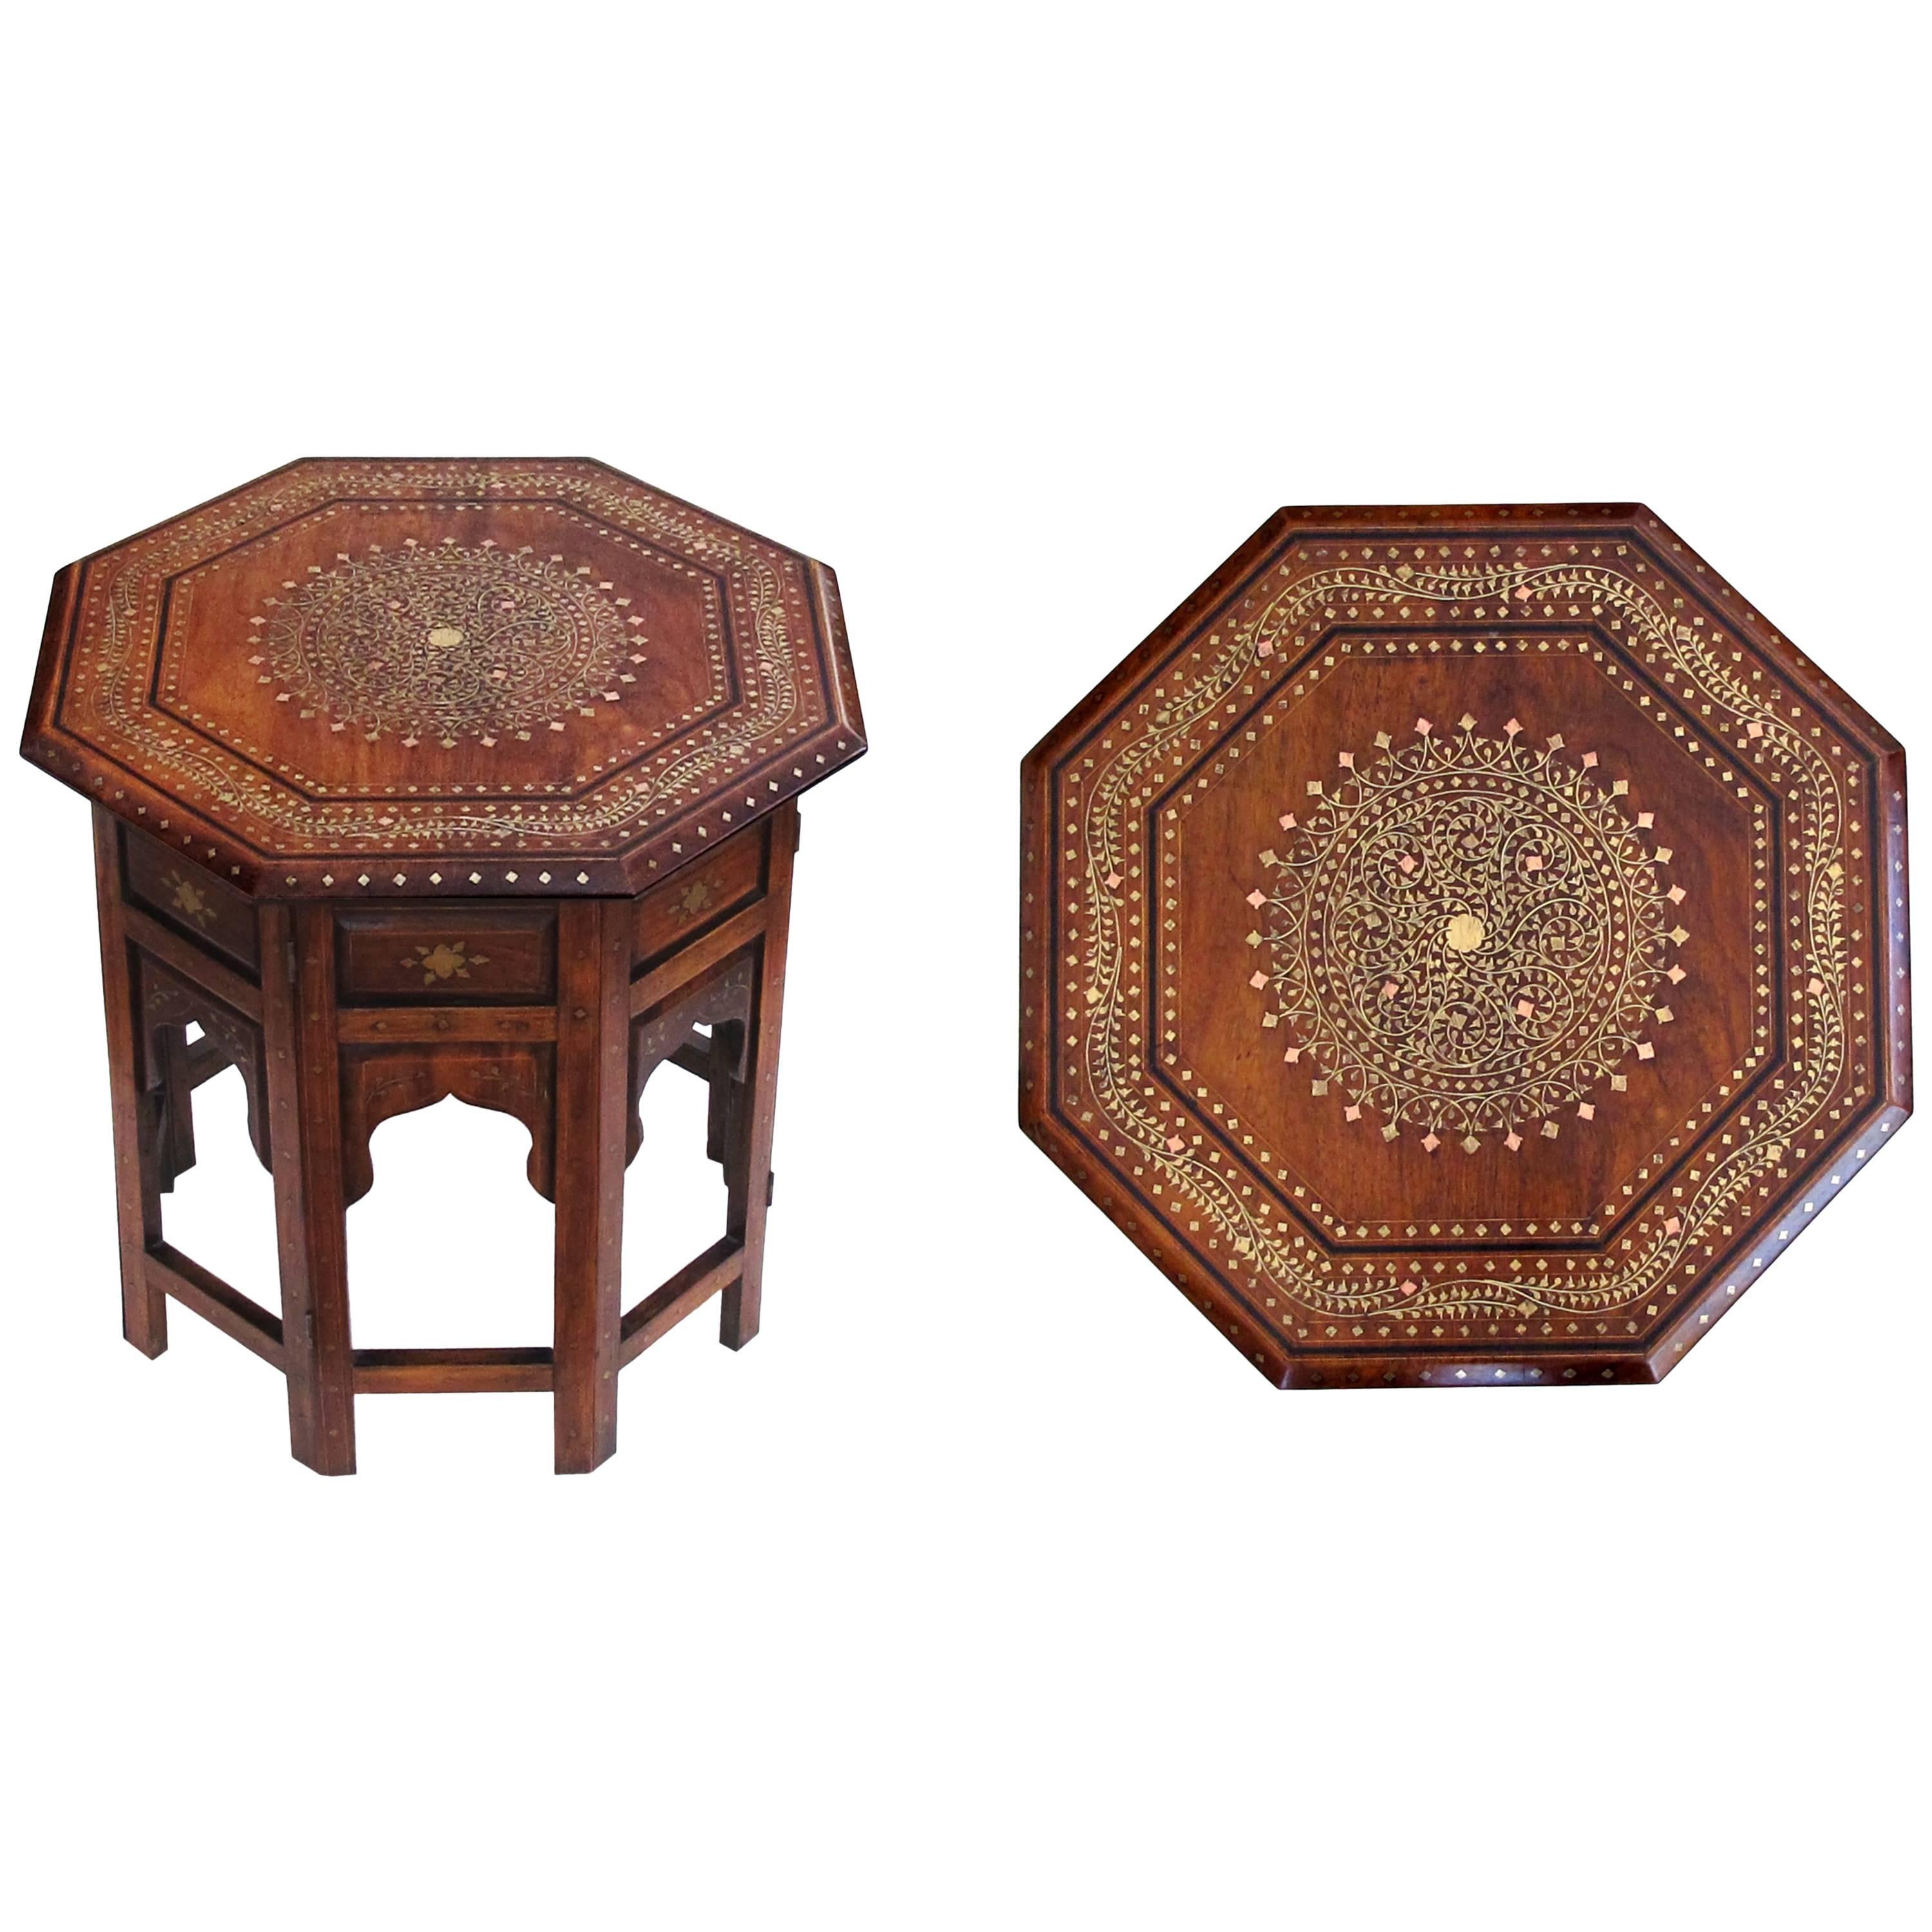 Intricately Designed Anglo-Indian Brass and Copper Octagonal Traveling Table